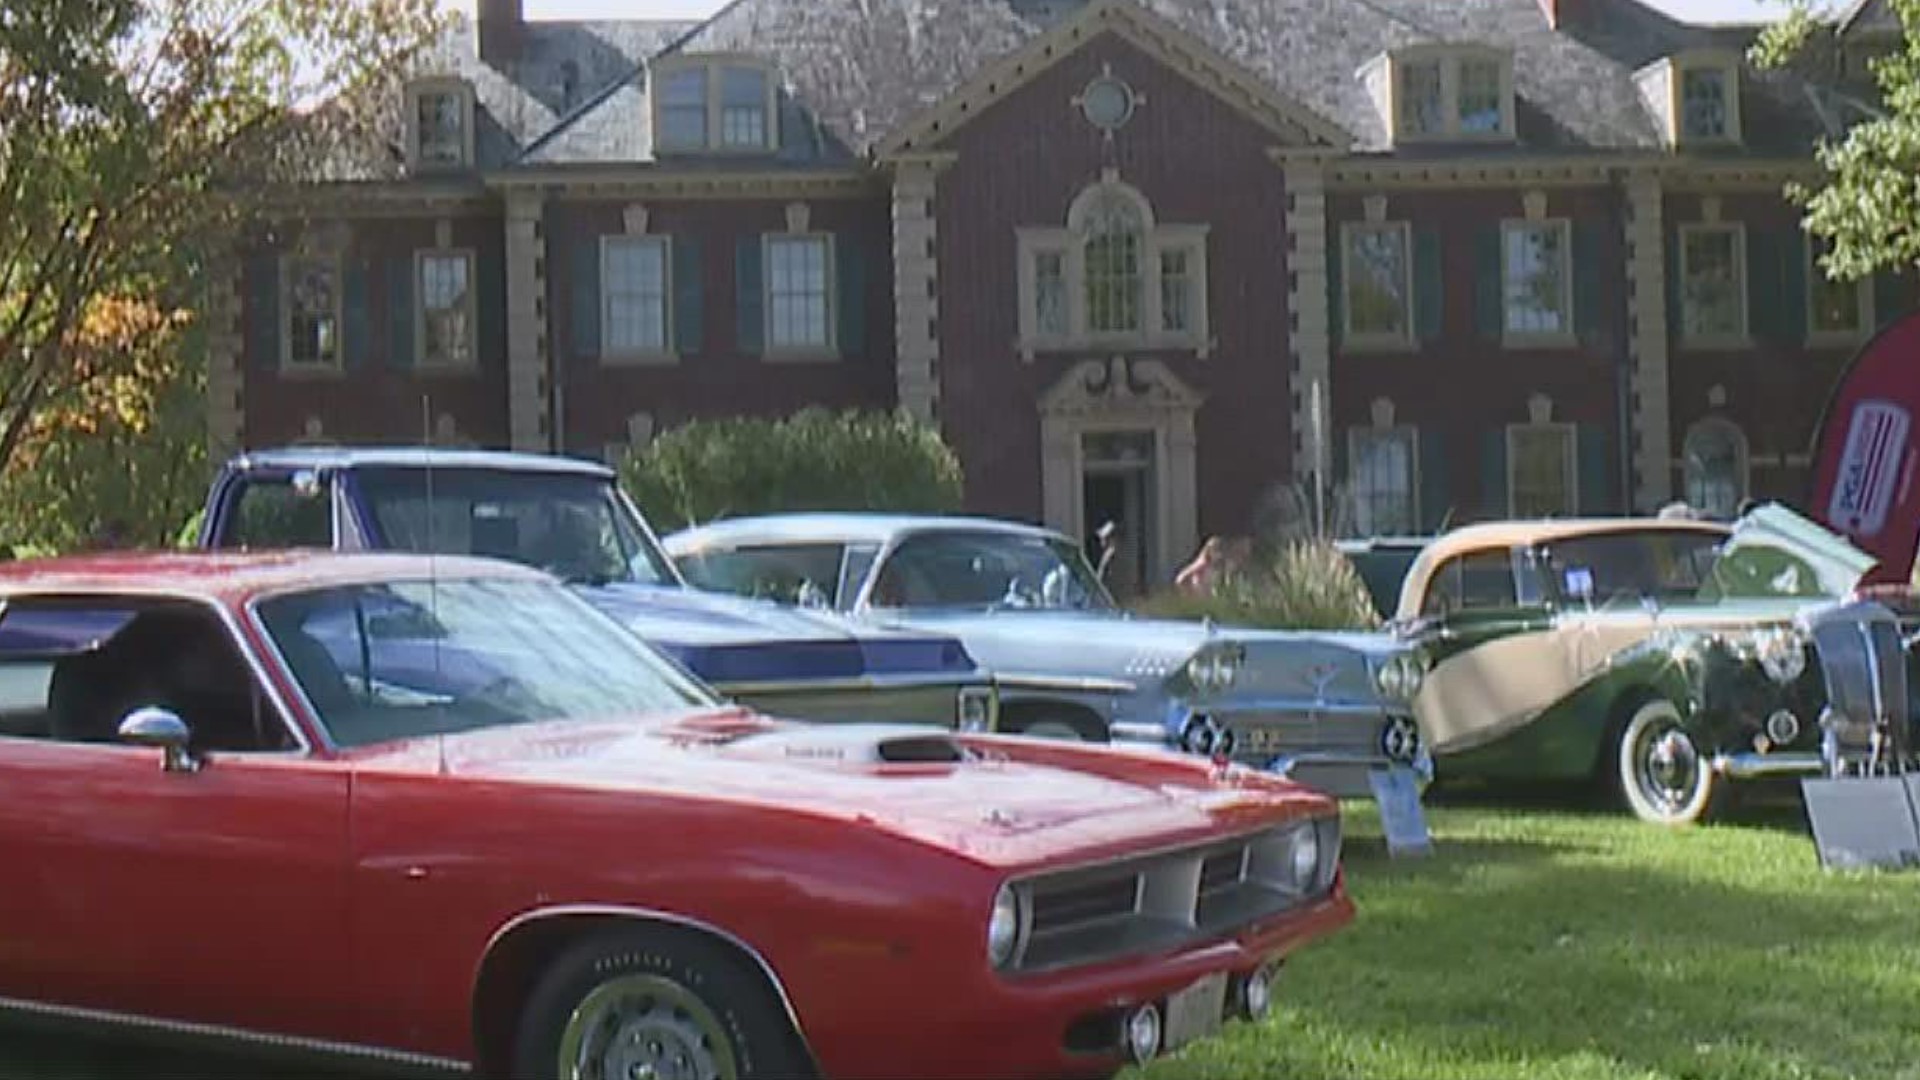 Proceeds from Sunday's car show at Regents Glen Country Club in Spring Garden Township will go directly to the organization PGA HOPE.